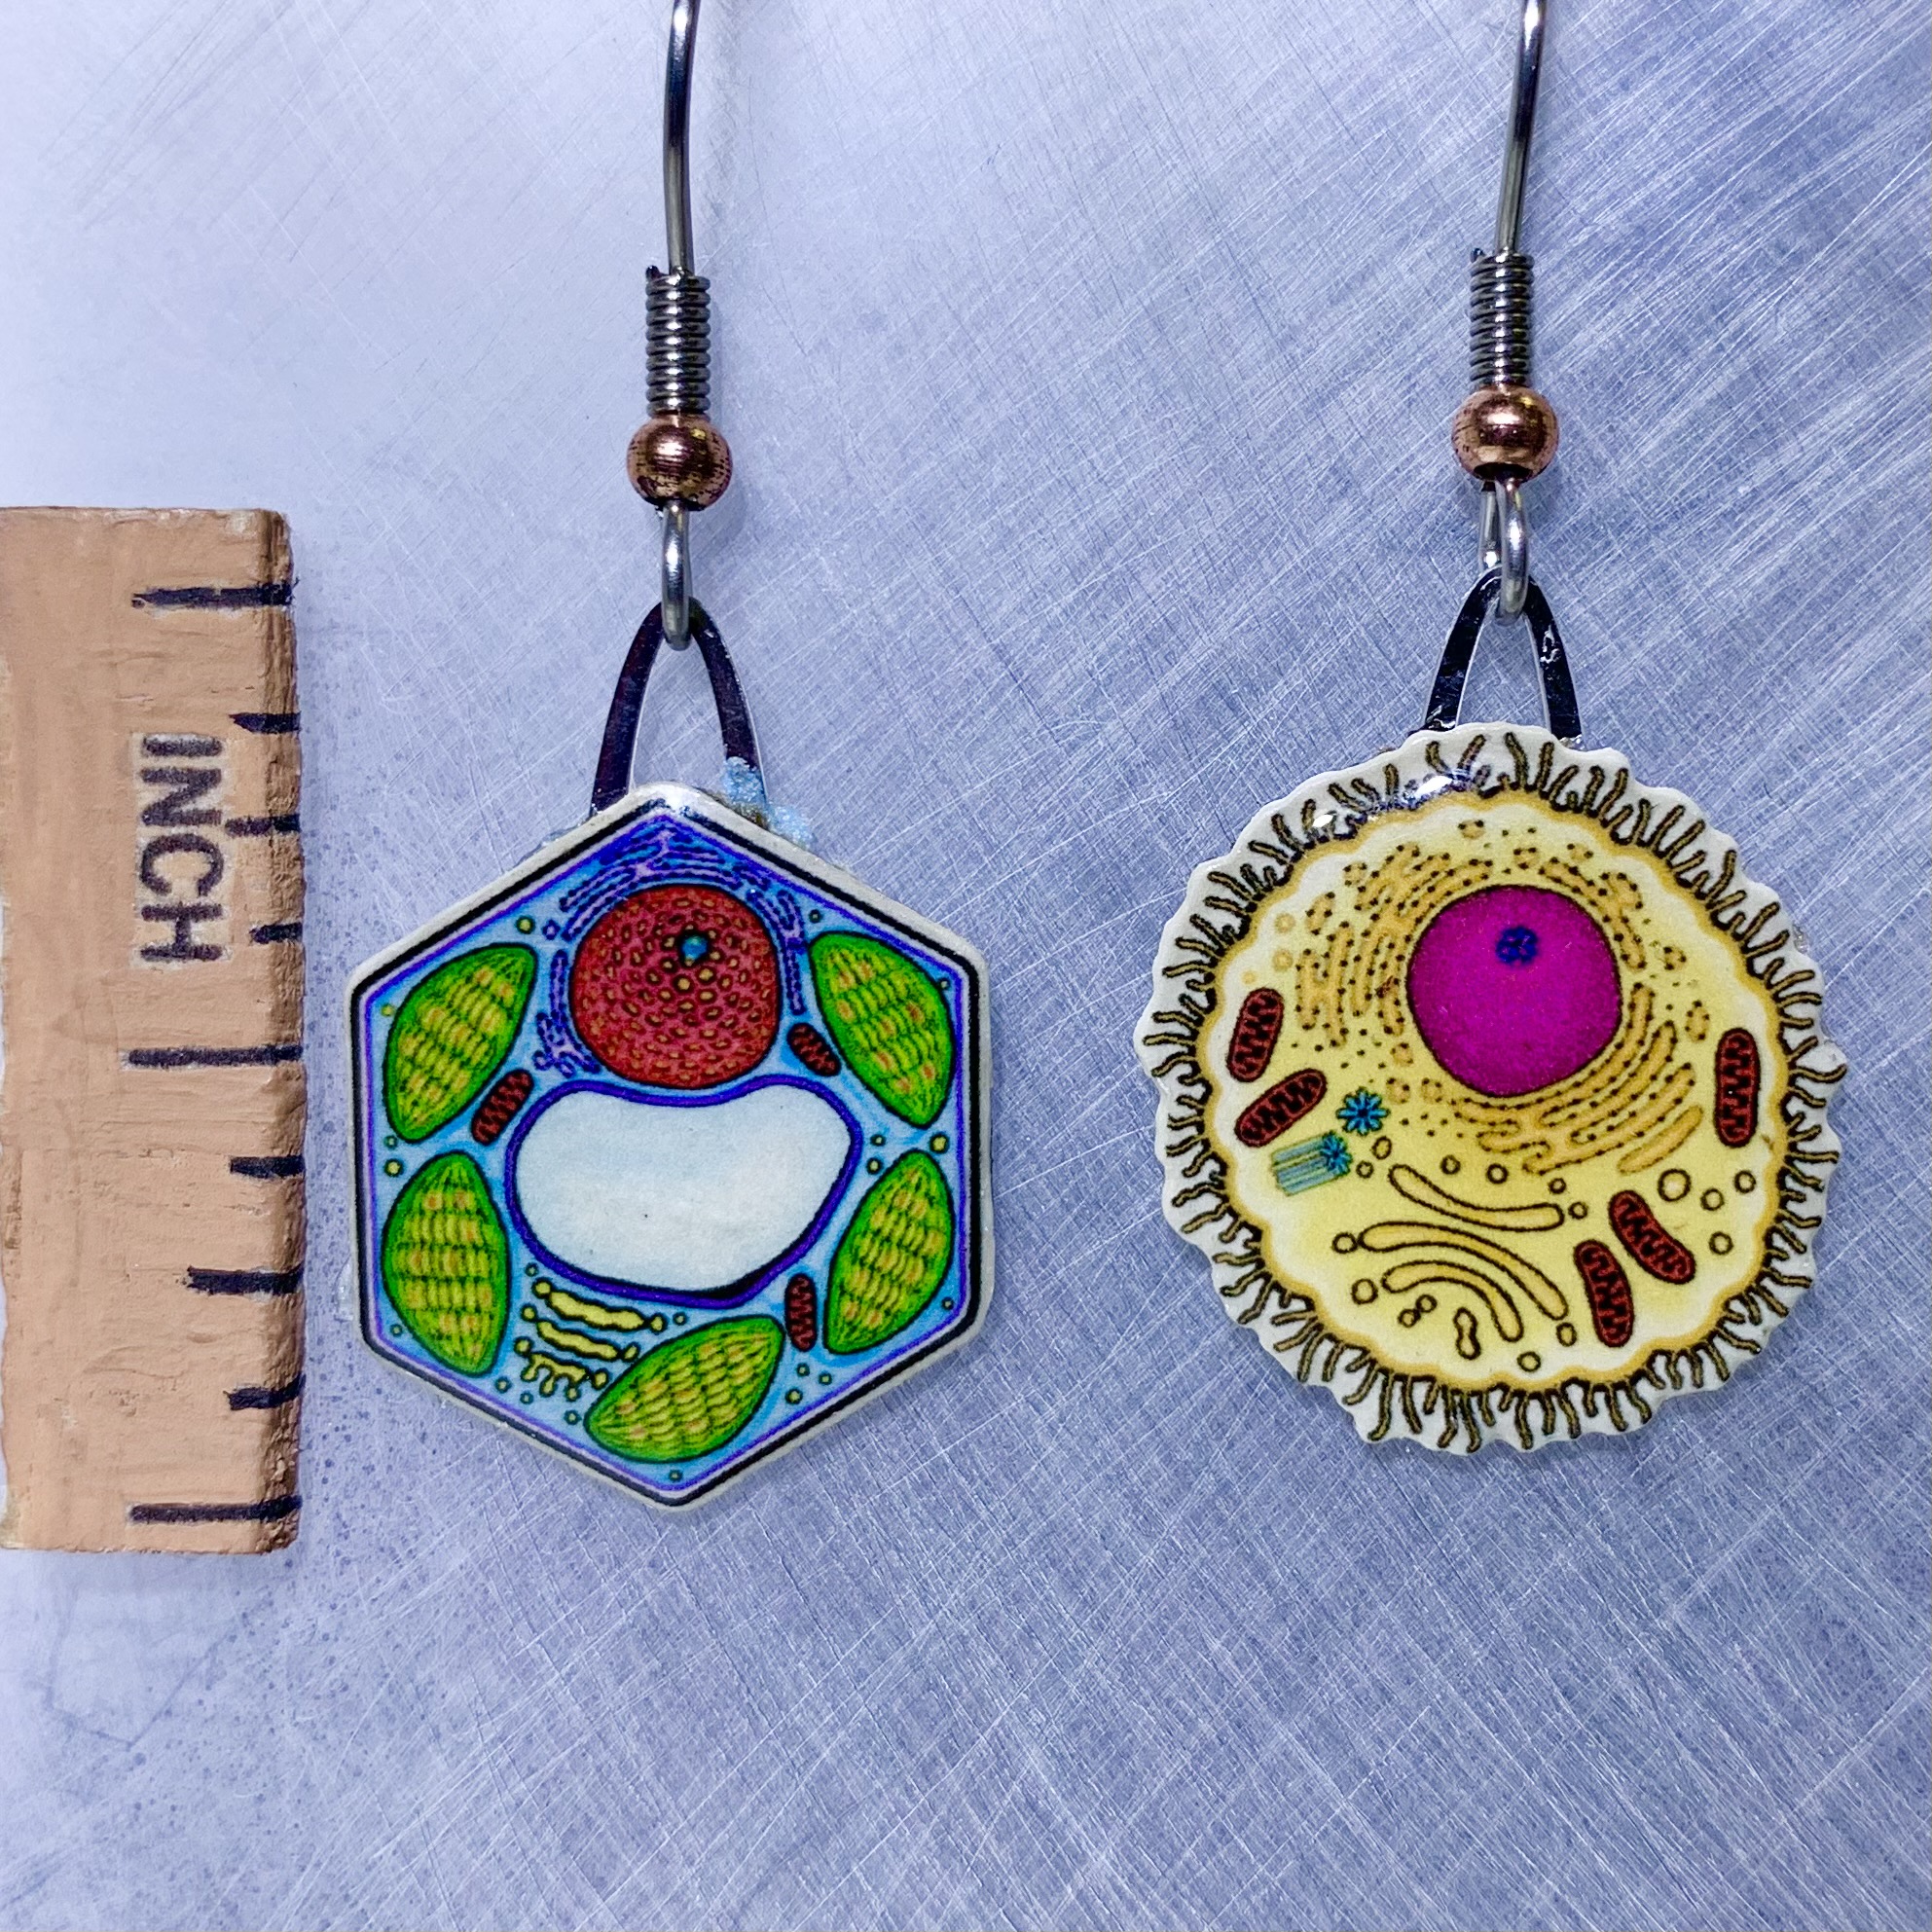 Picture shown is of 1 inch tall pair of earrings of Plant & Animal Cells.